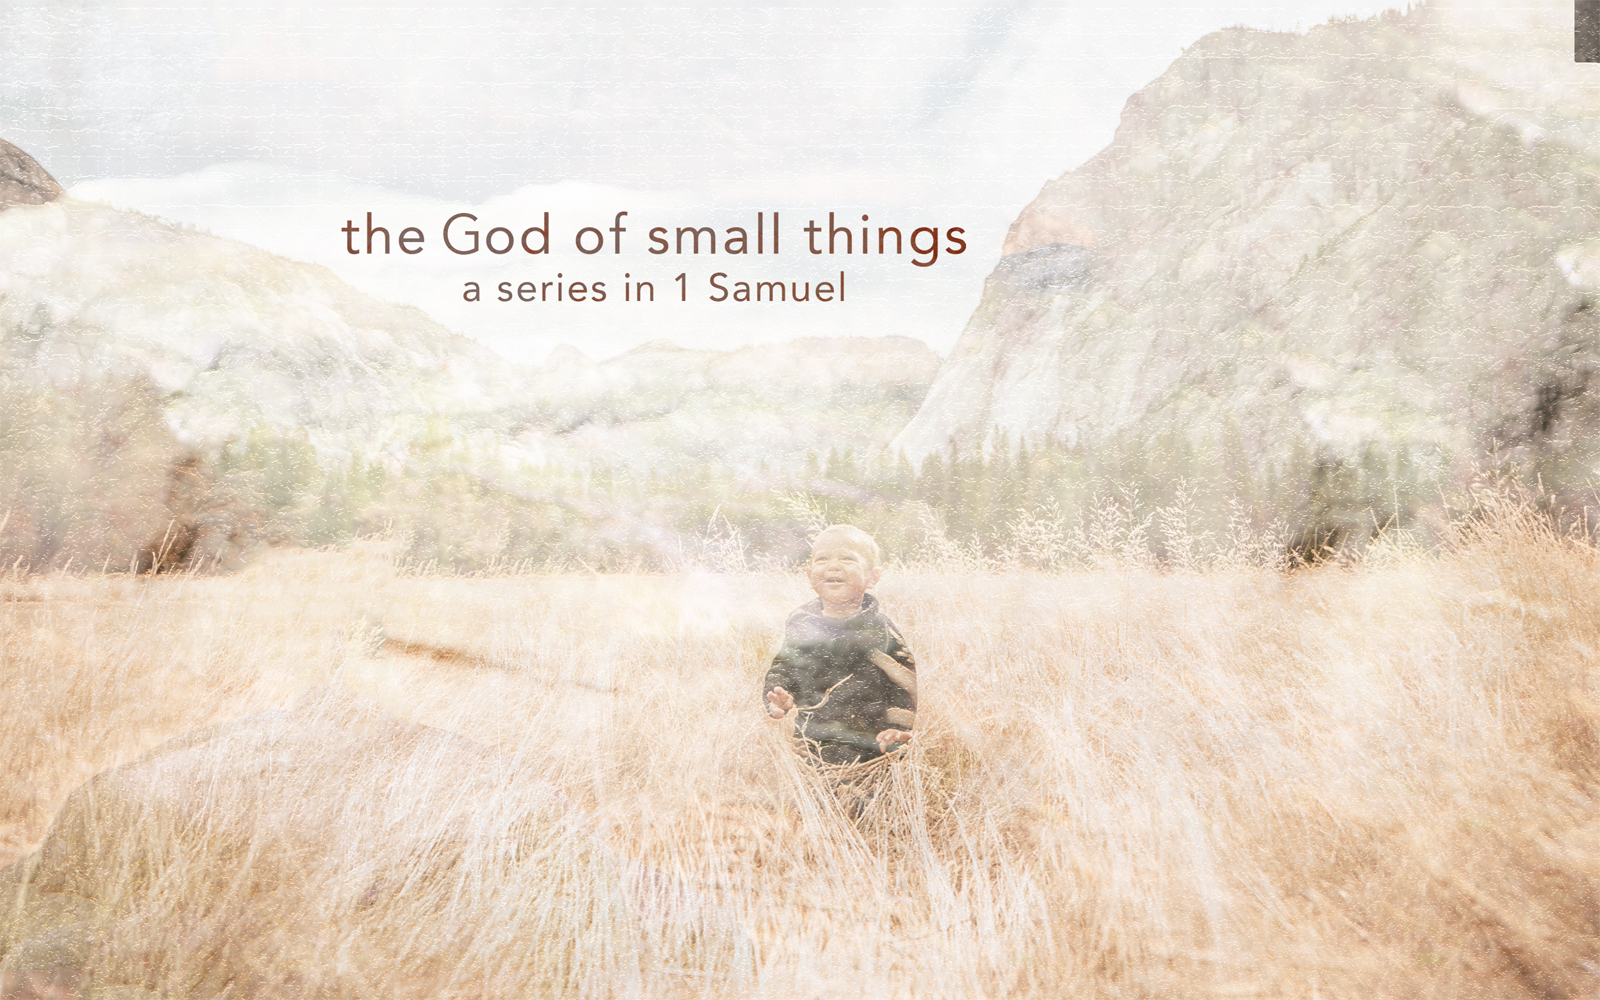 The God of Small Things (1 Samuel Studies)